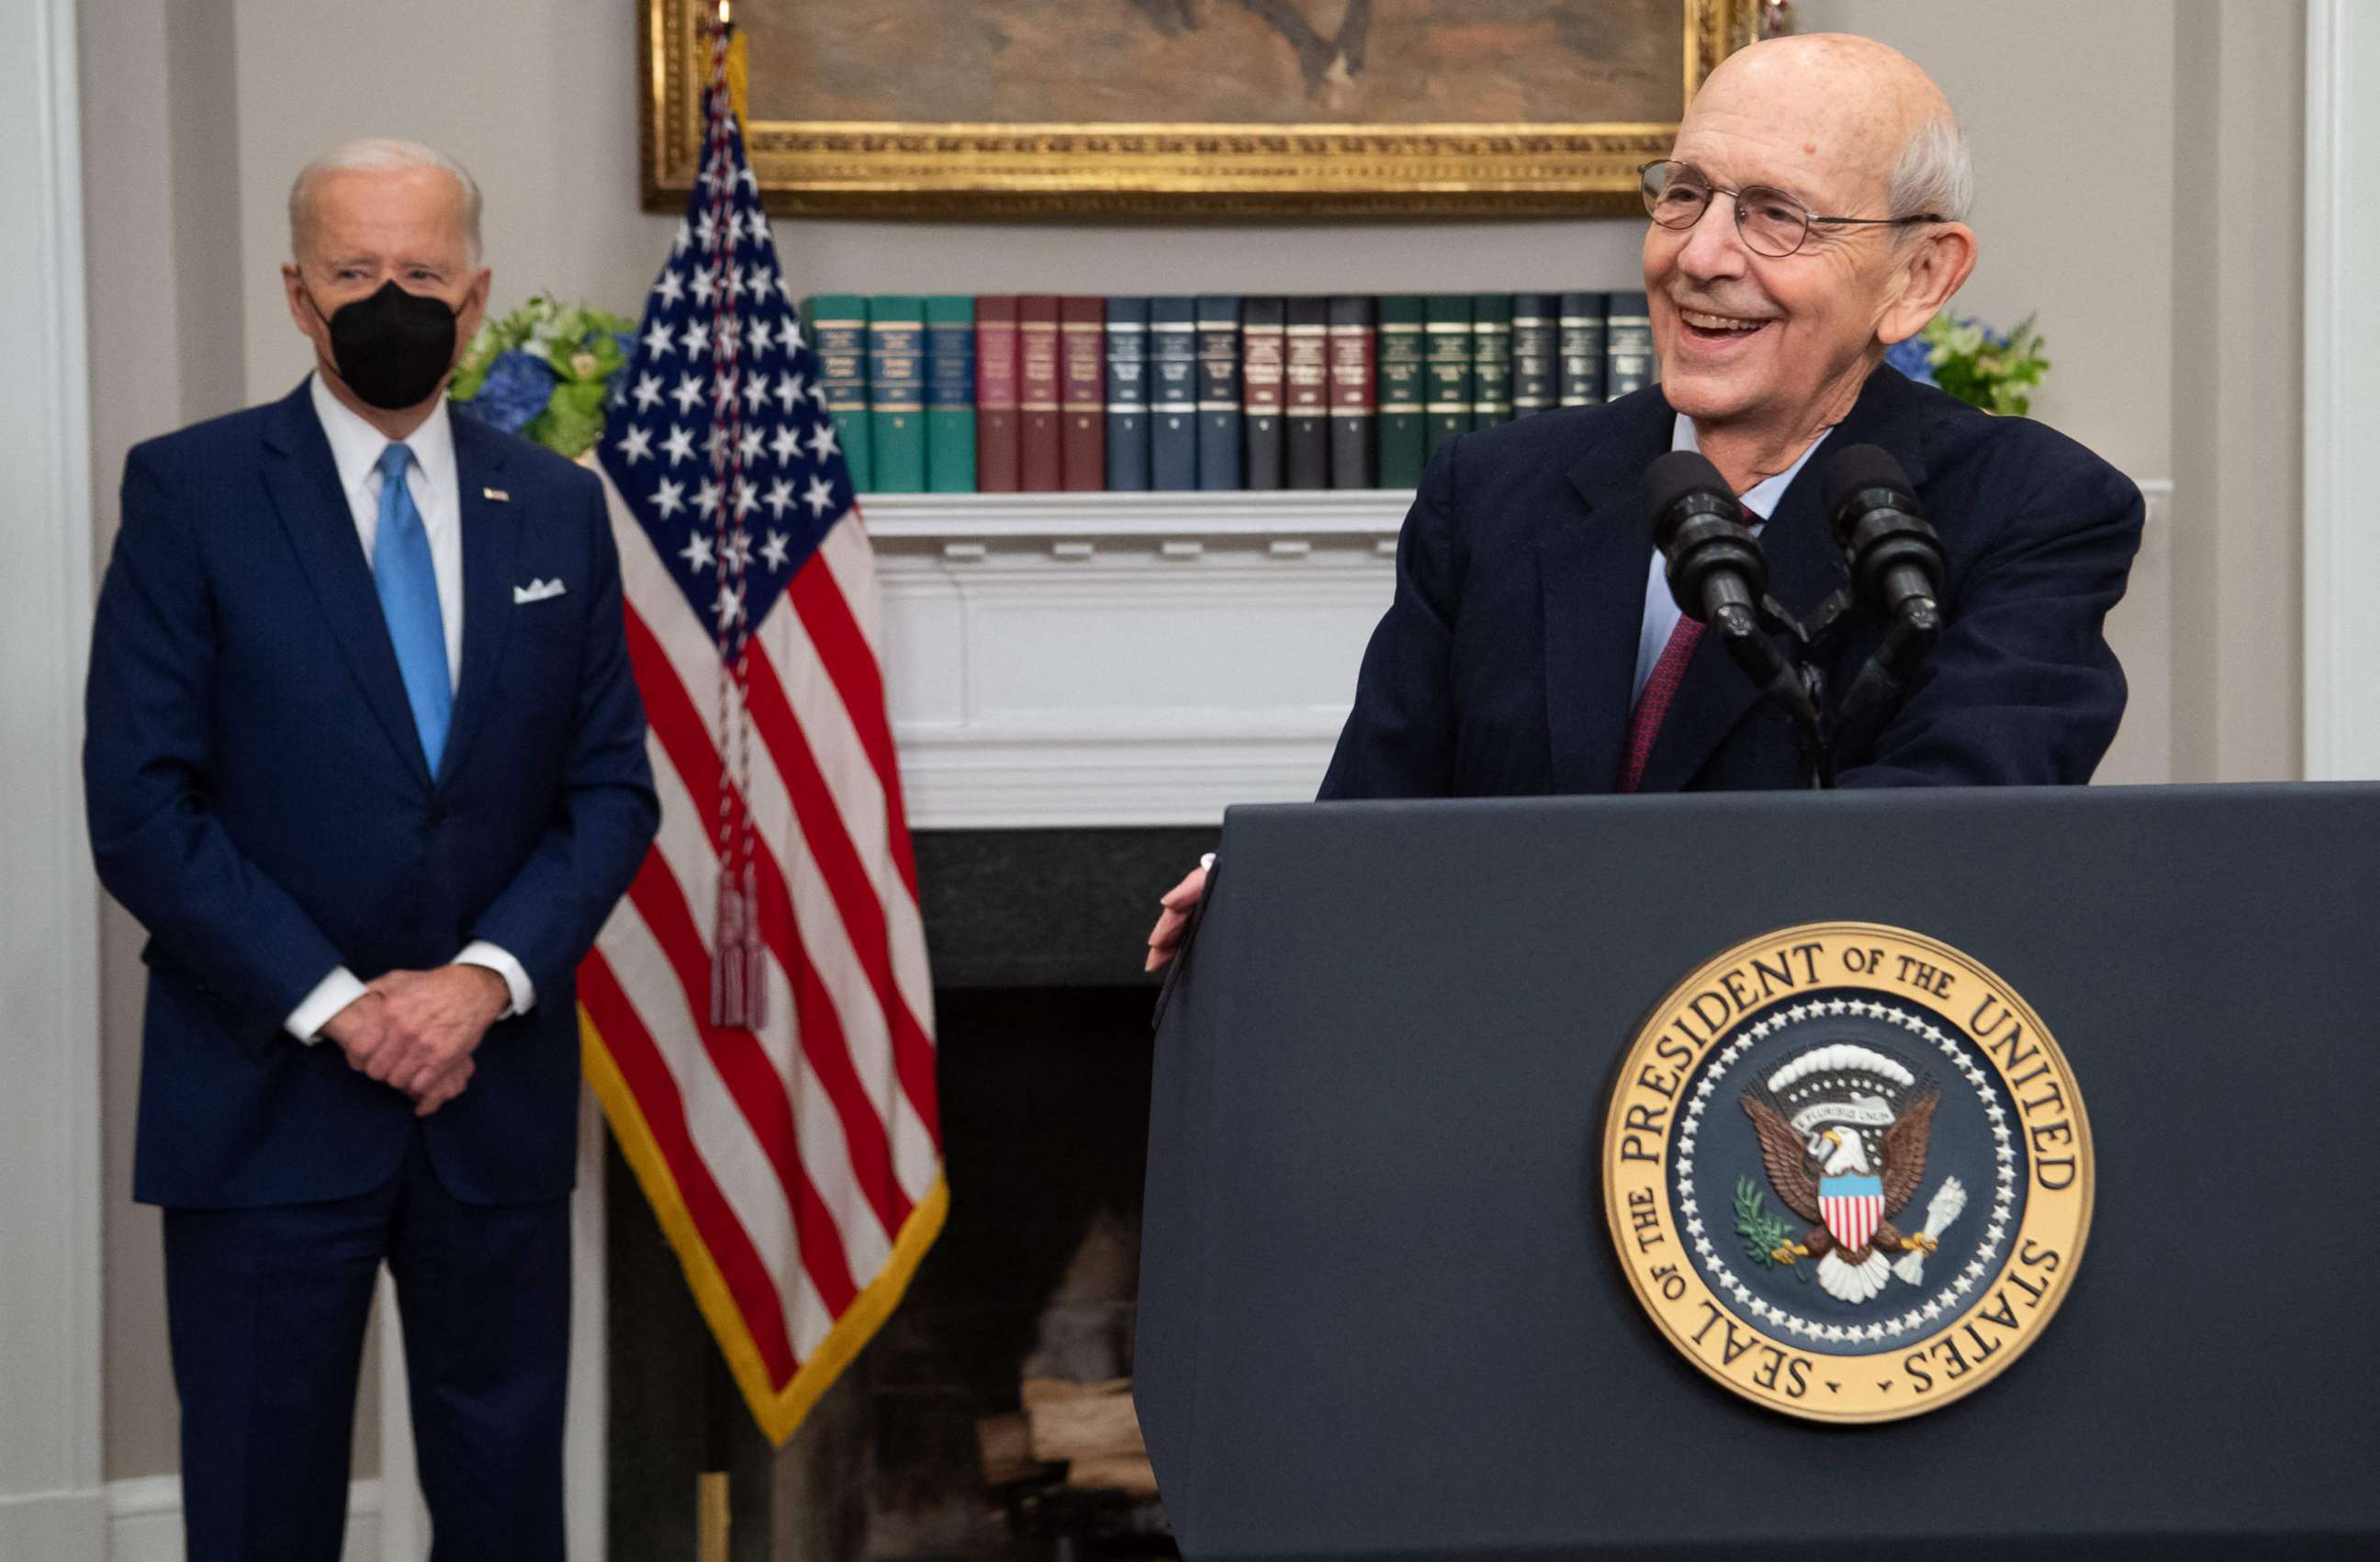 PHOTO: Supreme Court Justice Stephen Breyer announces his retirement alongside President Joe Biden during an event in the Roosevelt Room of the White House, in Washington, D.C., on Jan. 27, 2022.